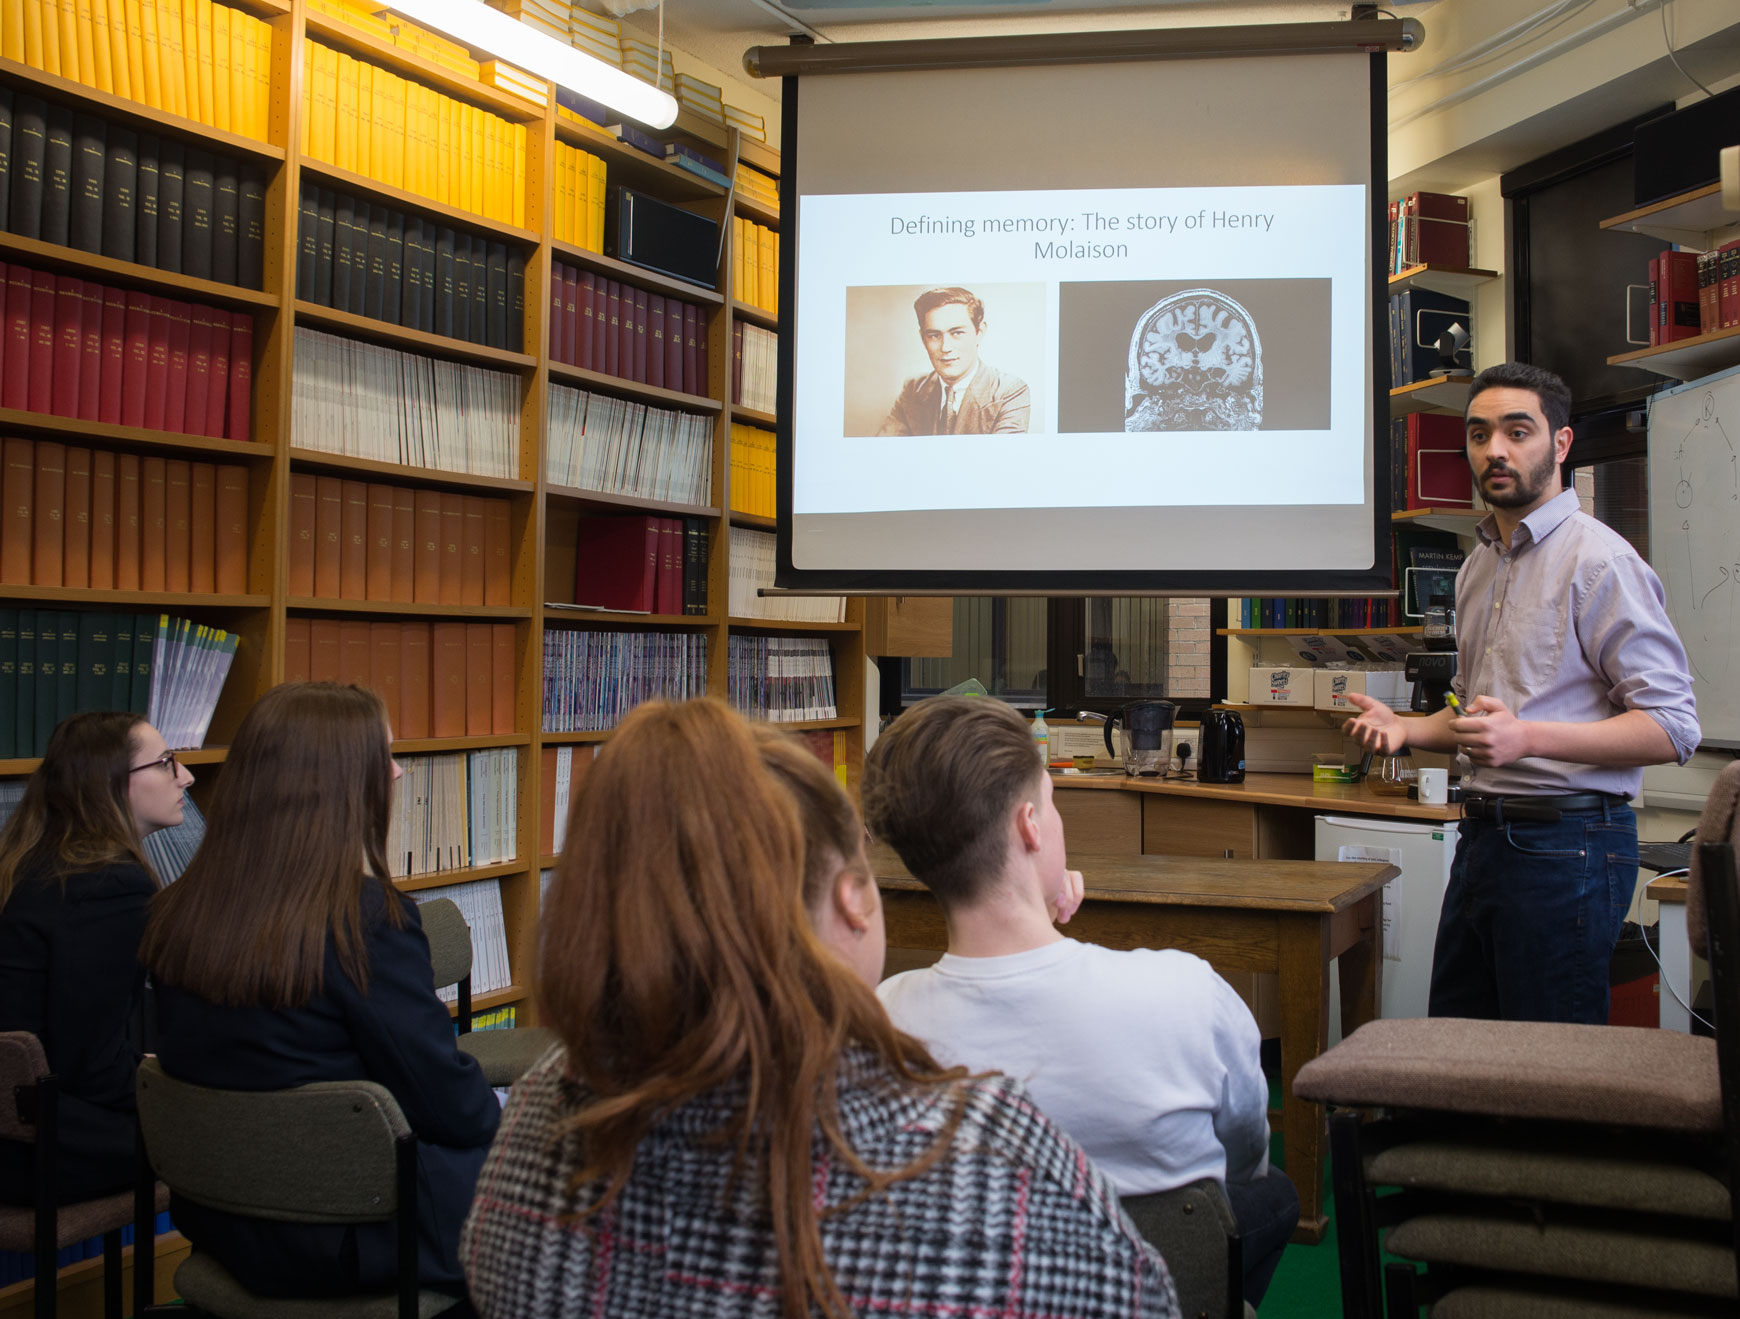 Pupils in small groups talked informally to Unit members about key concepts and challenges in brain research. Here, Unit scientist Mohamady El-Gaby moderates a discussion on the neuronal basis of memory.